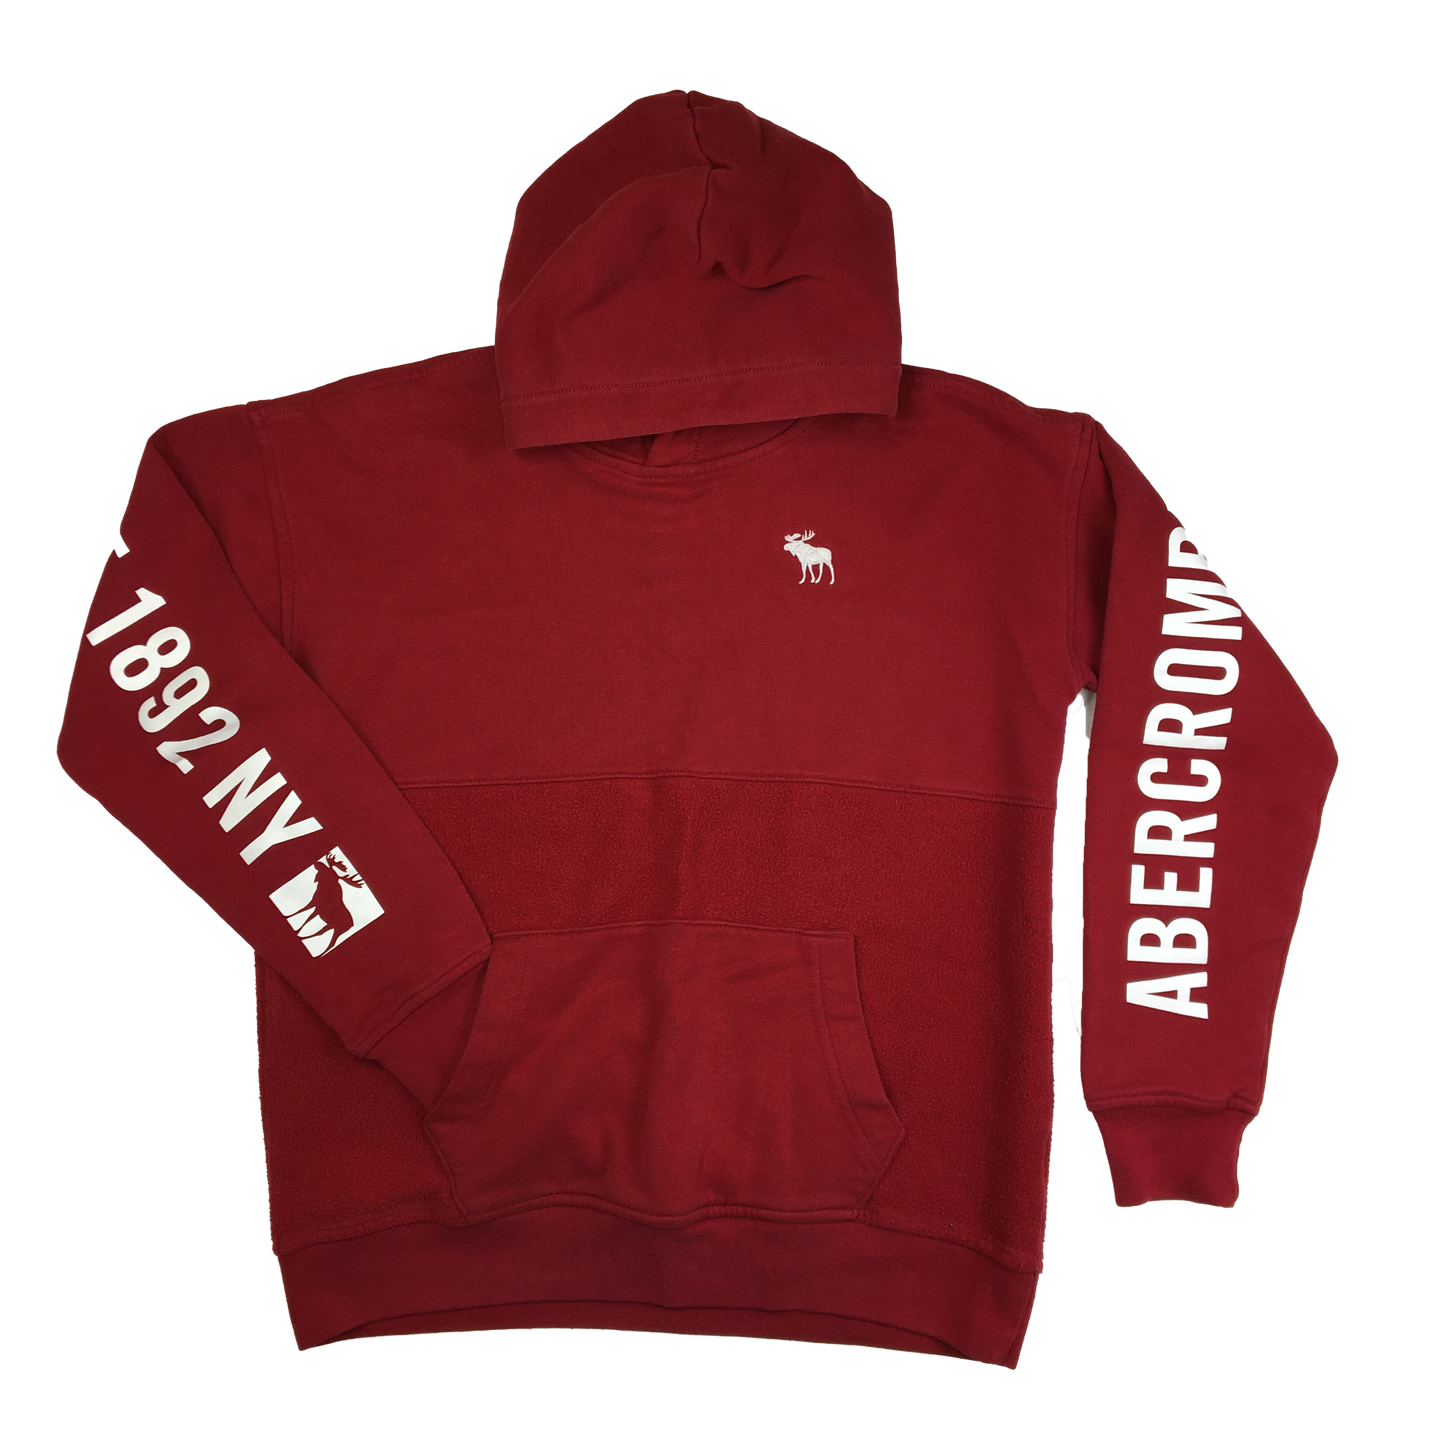 Abercrombie Red Hooded Pull-Over 13-14